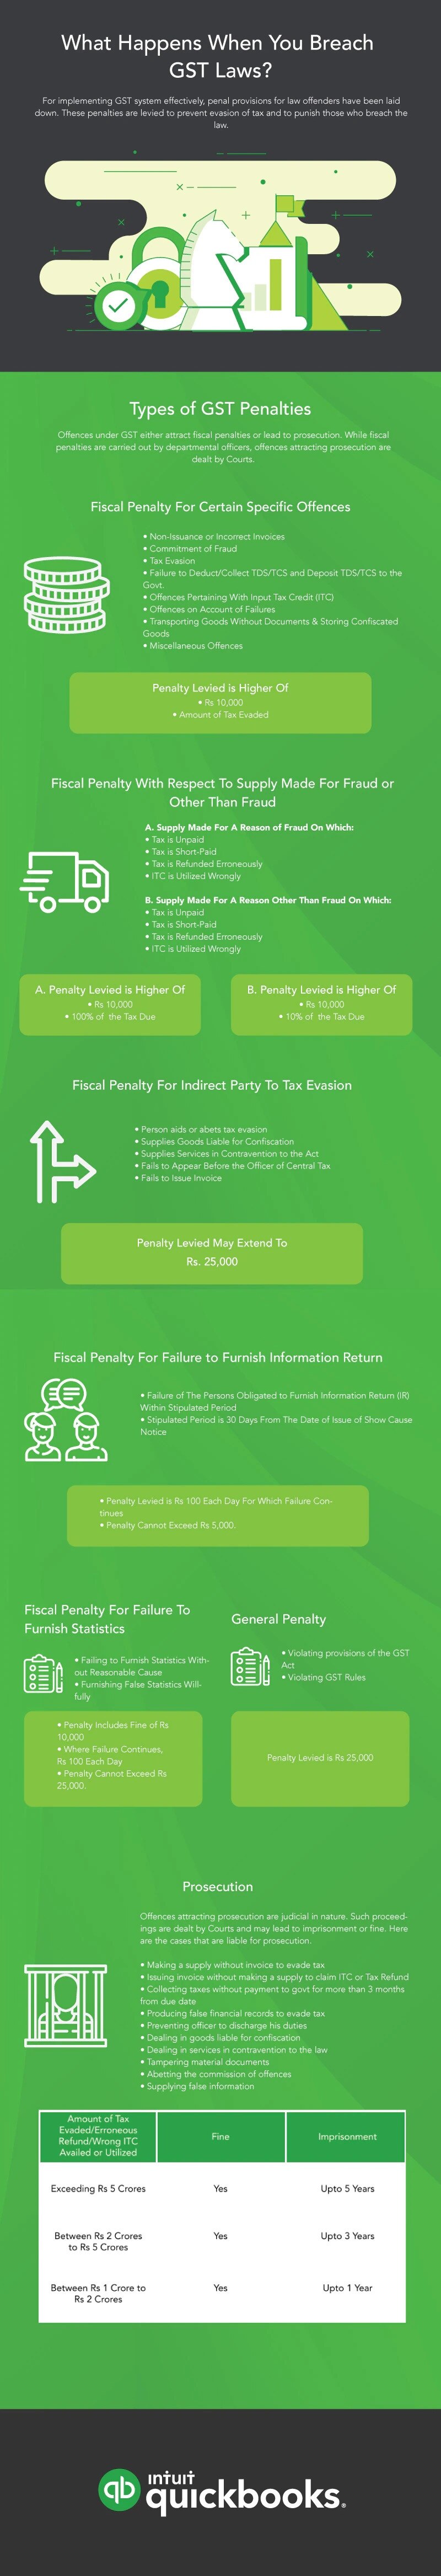 GST Penalty Infographic